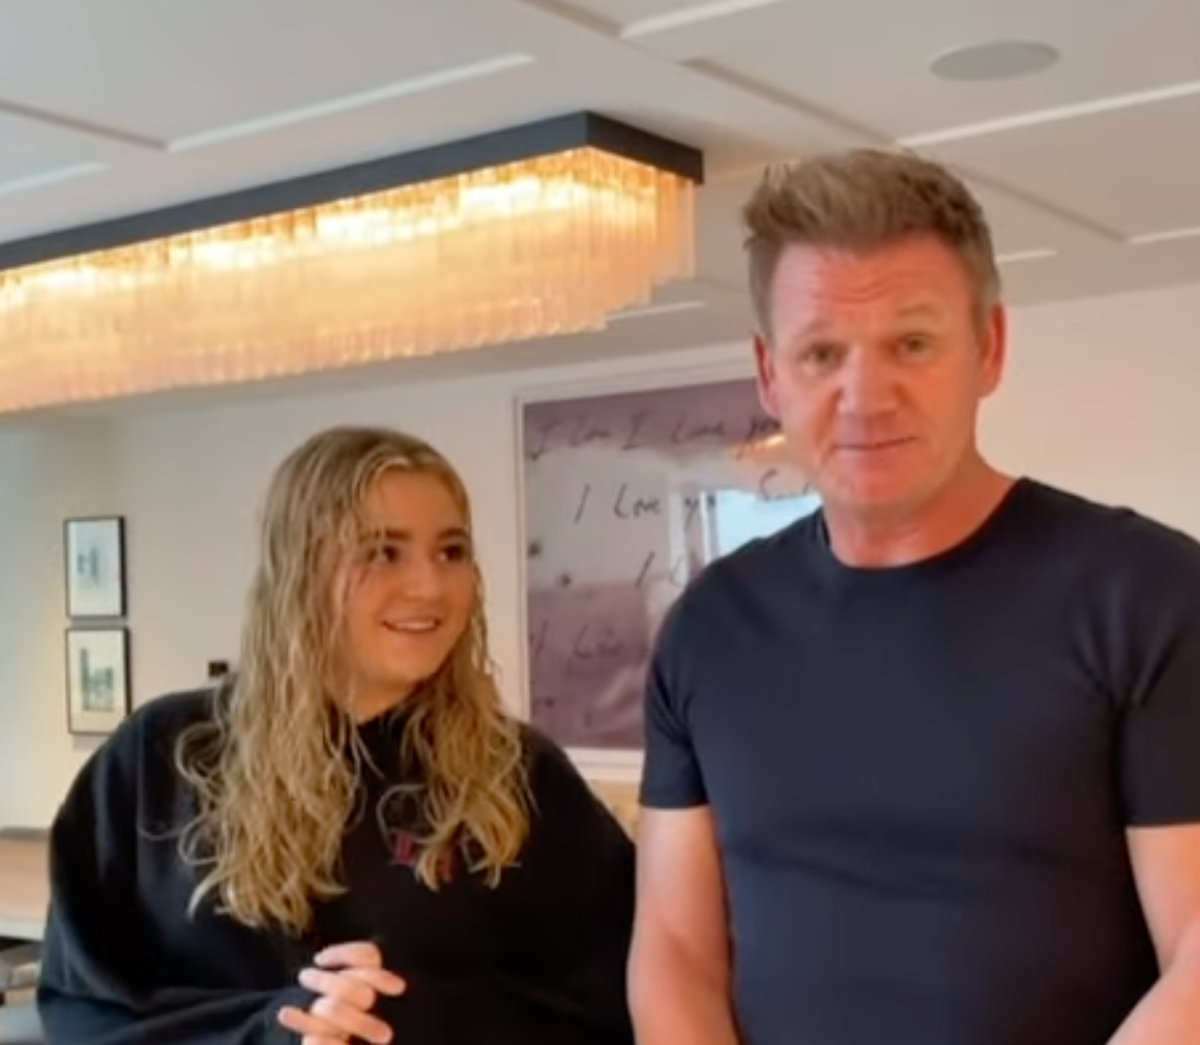 Gordon Ramsay ‘proud’ of daughter for standing up to Steve Allen over ‘chubby’ remark